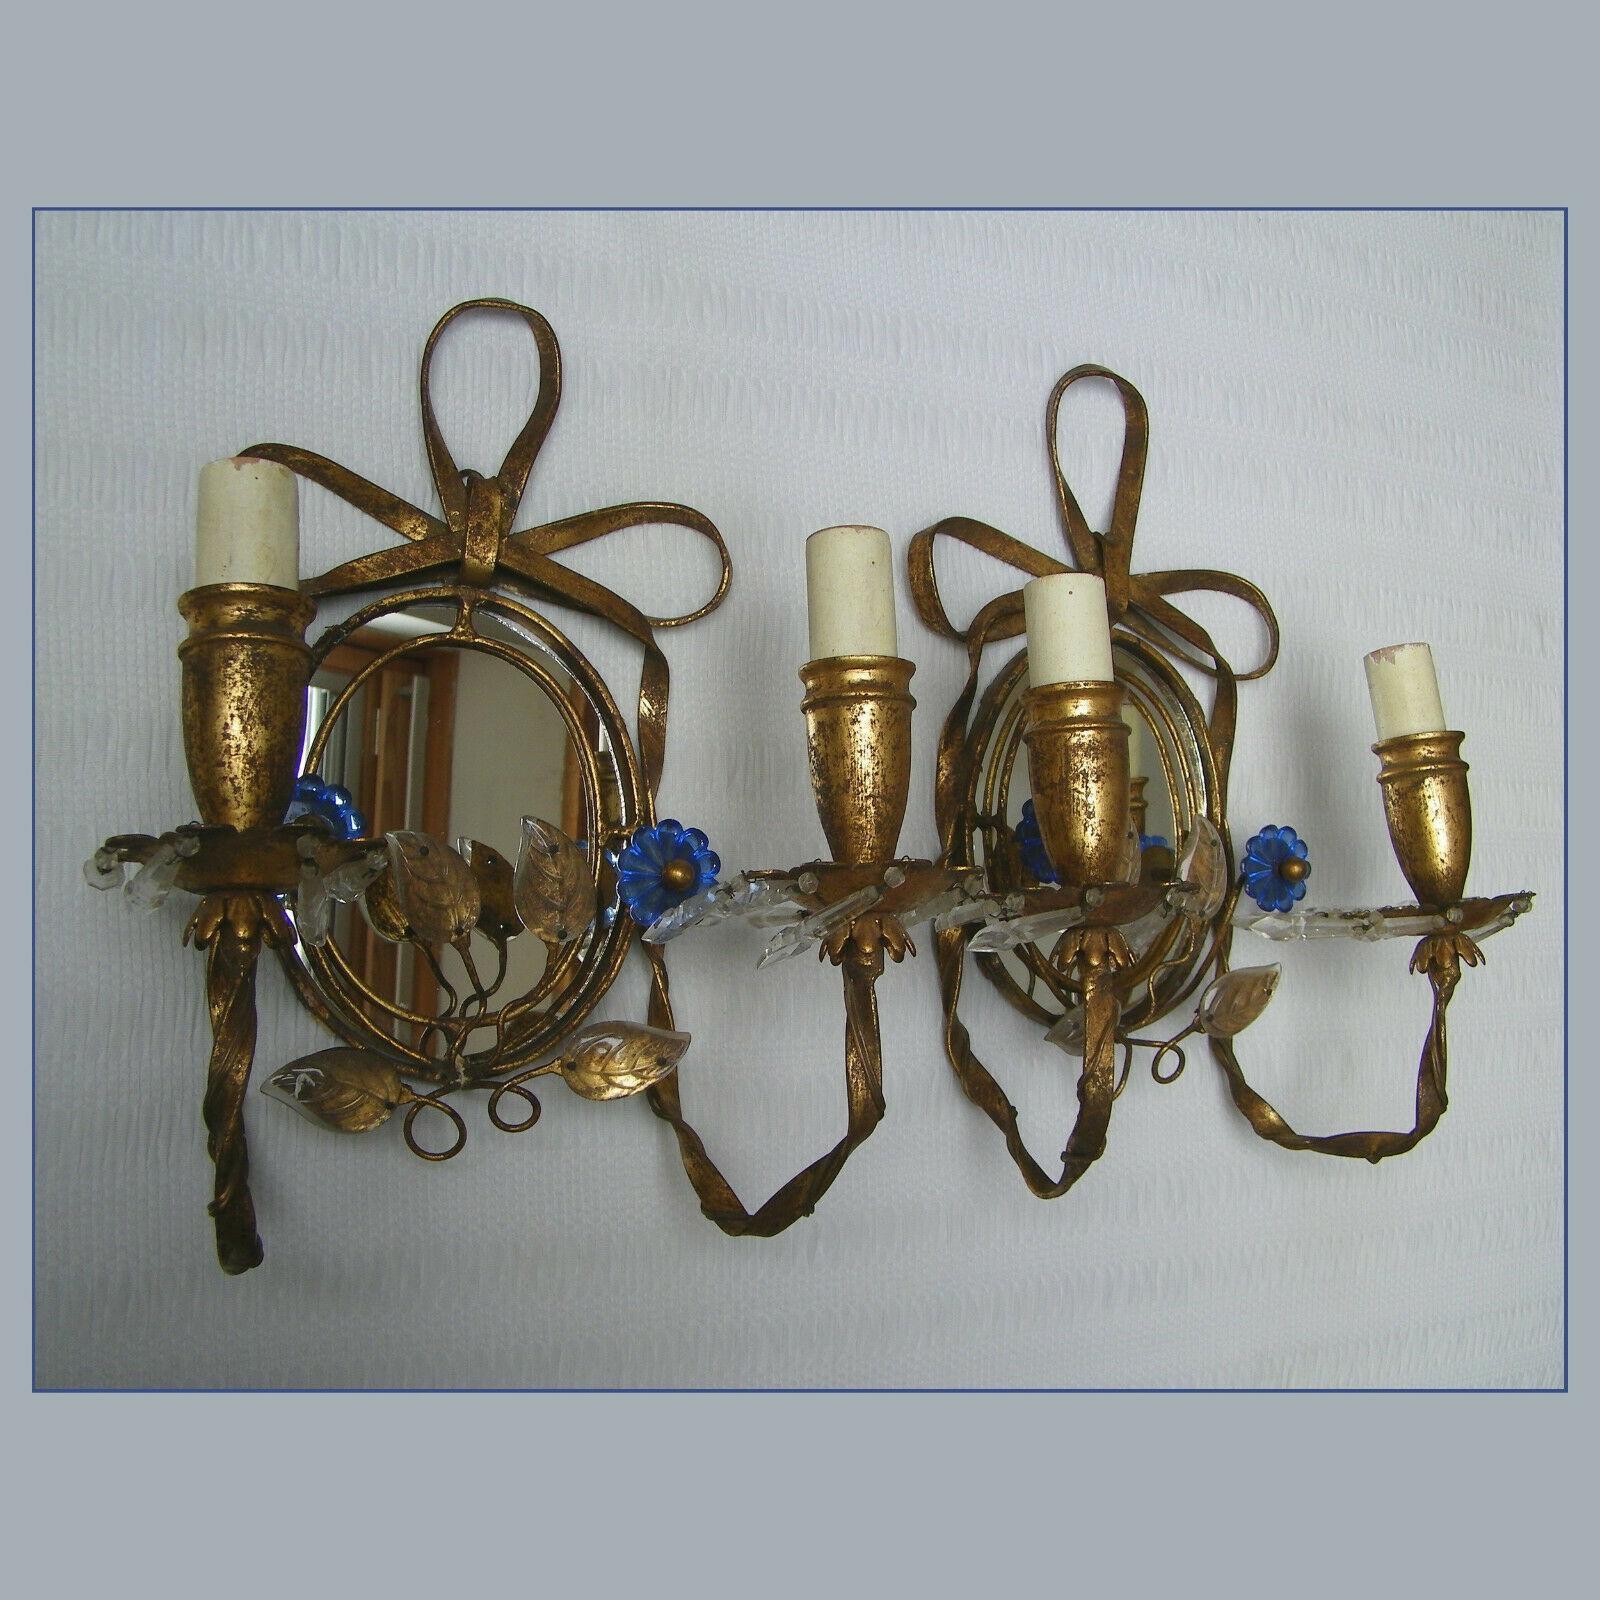 Pair Hollywood Regency Gilt Tole and Crystal Floral Wall Sconces. Tole work is beautiful, ribbon on top, reminescent of Louis XVI design. Center mirror back. Please look closely at pictures as this pair is stunning.